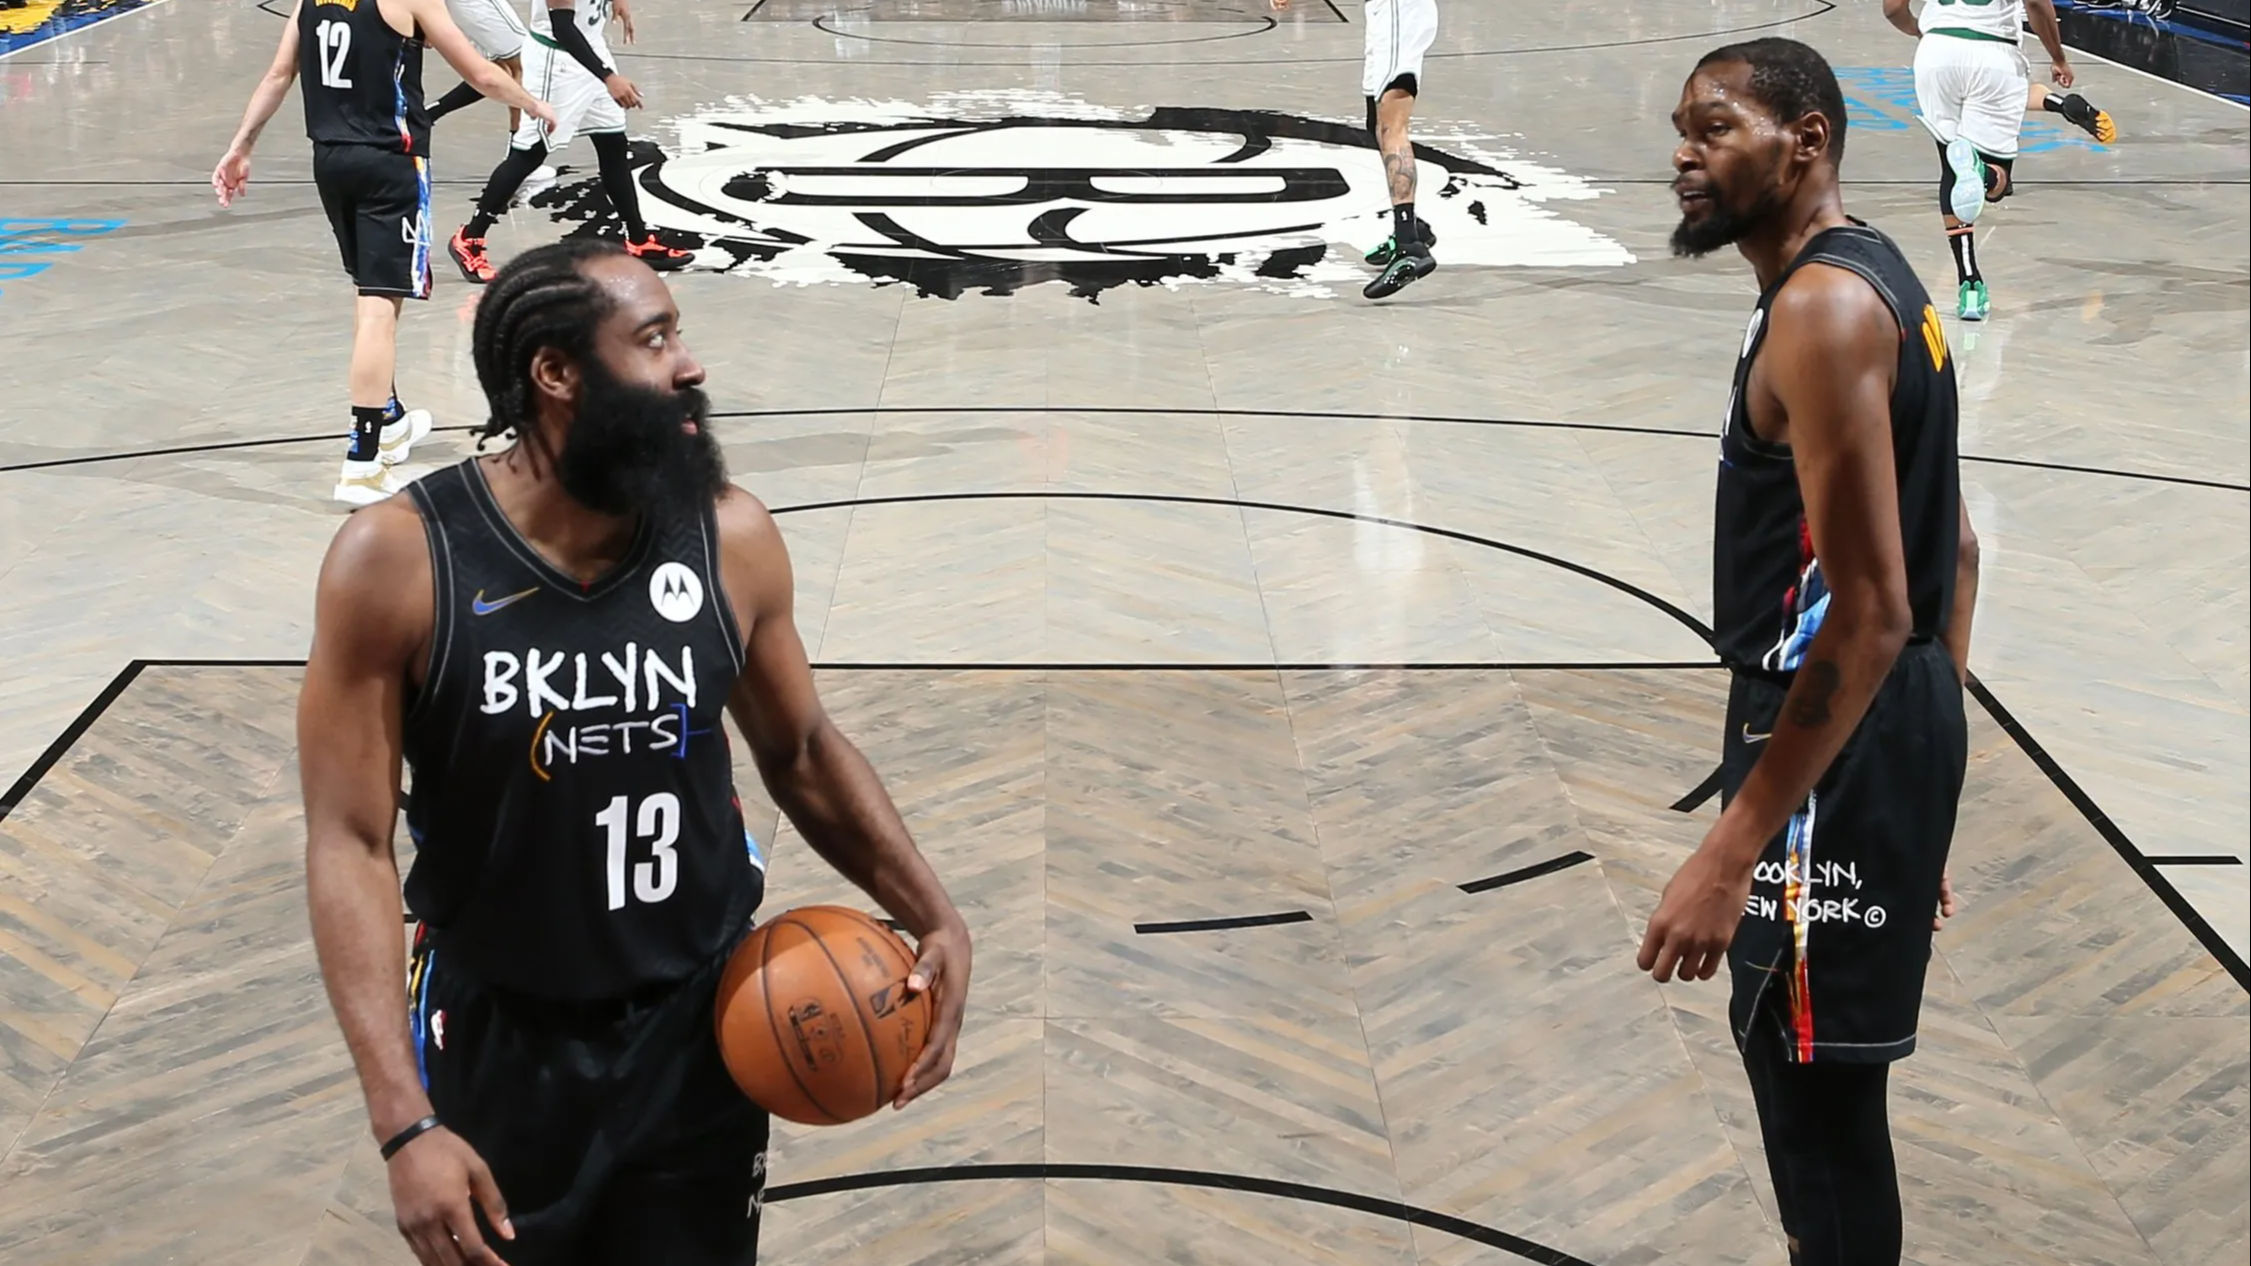 Trio of dreams: Brooklyn Nets’ title charge sponsored by Harden, Irving and Durant